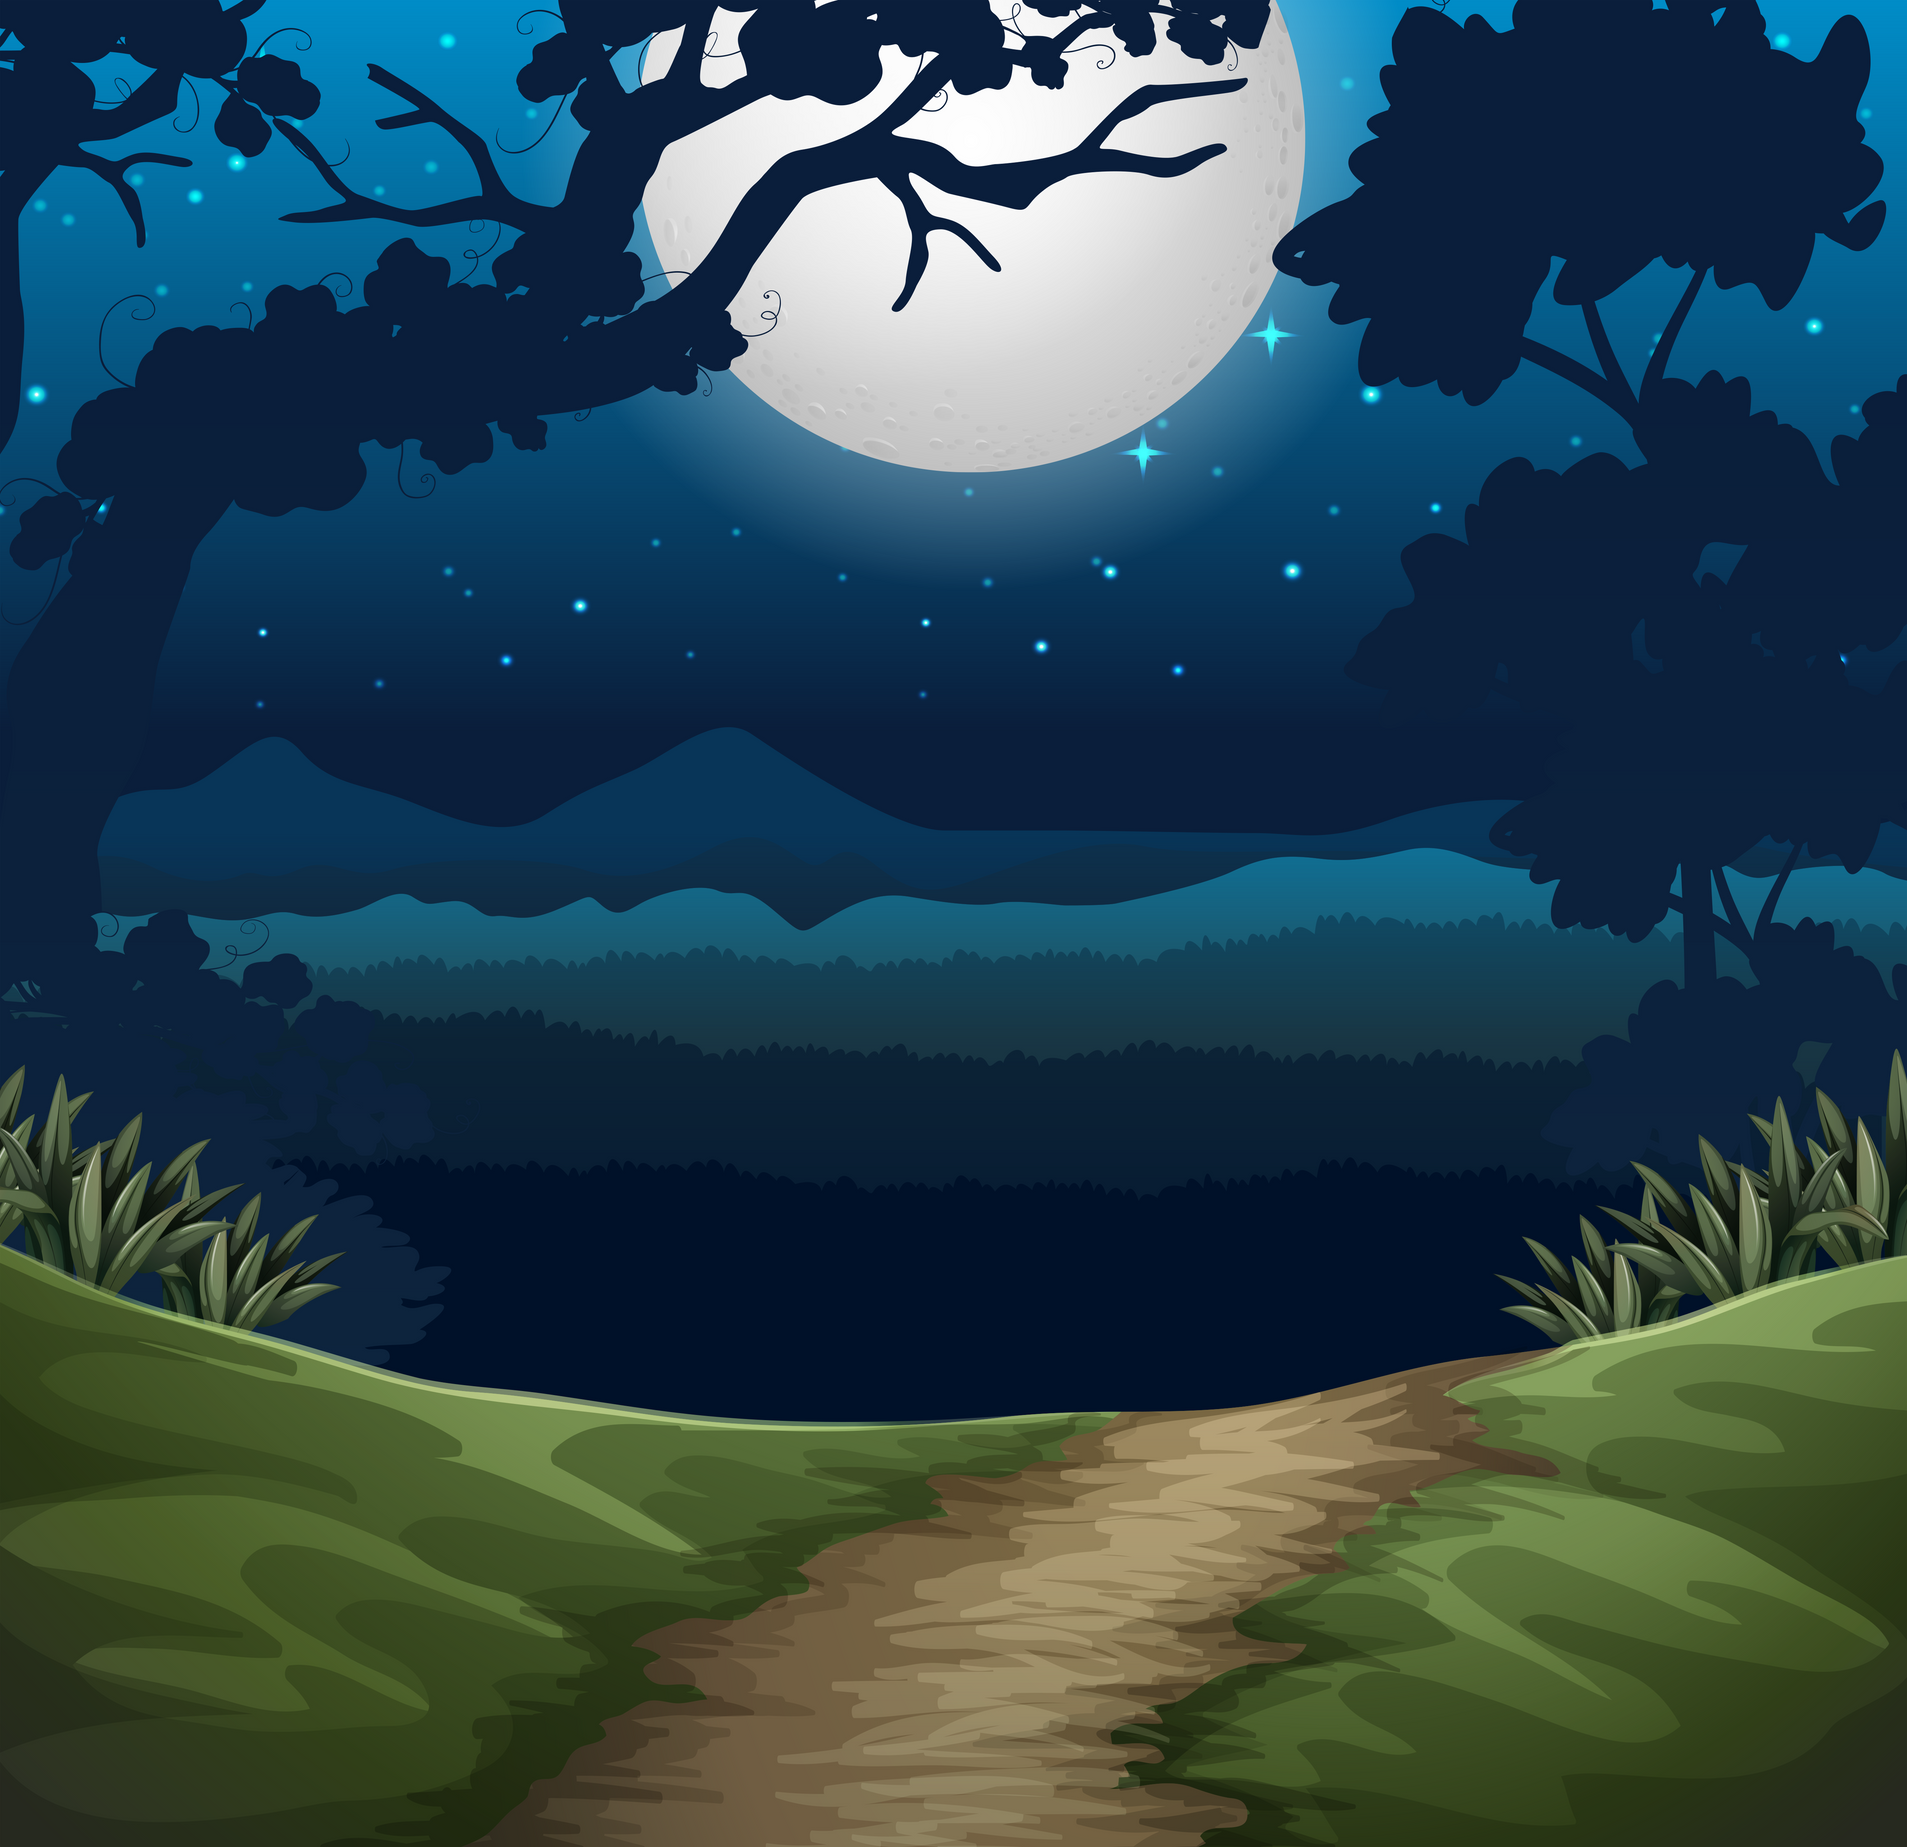 forest at night scene